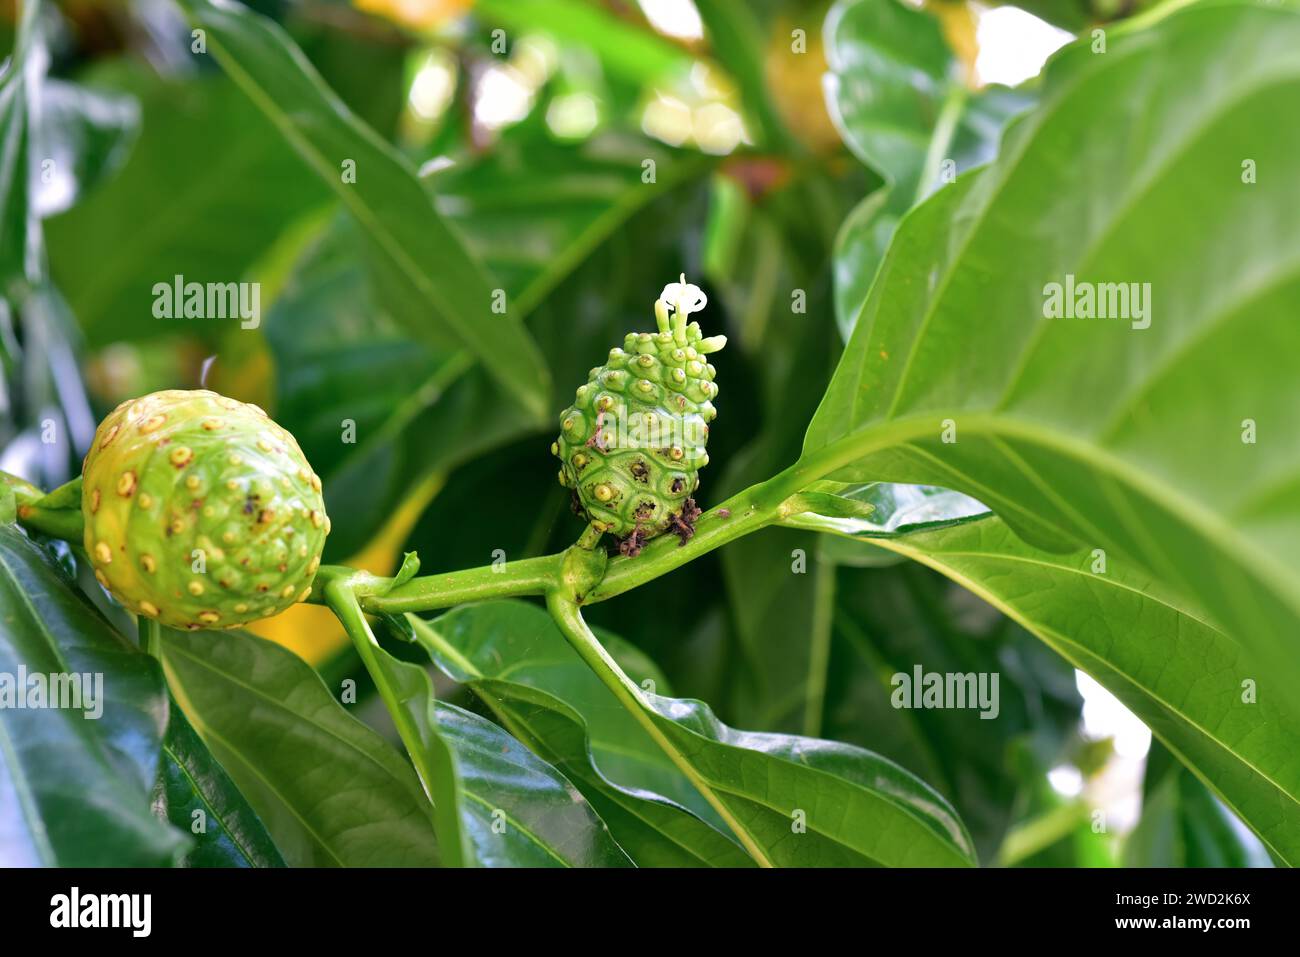 Noni (Morinda citrifolia) is a perennial tree native to souteastern Asia. Its fruits (infrutescences) are edible and medicinal. This photo was taken i Stock Photo